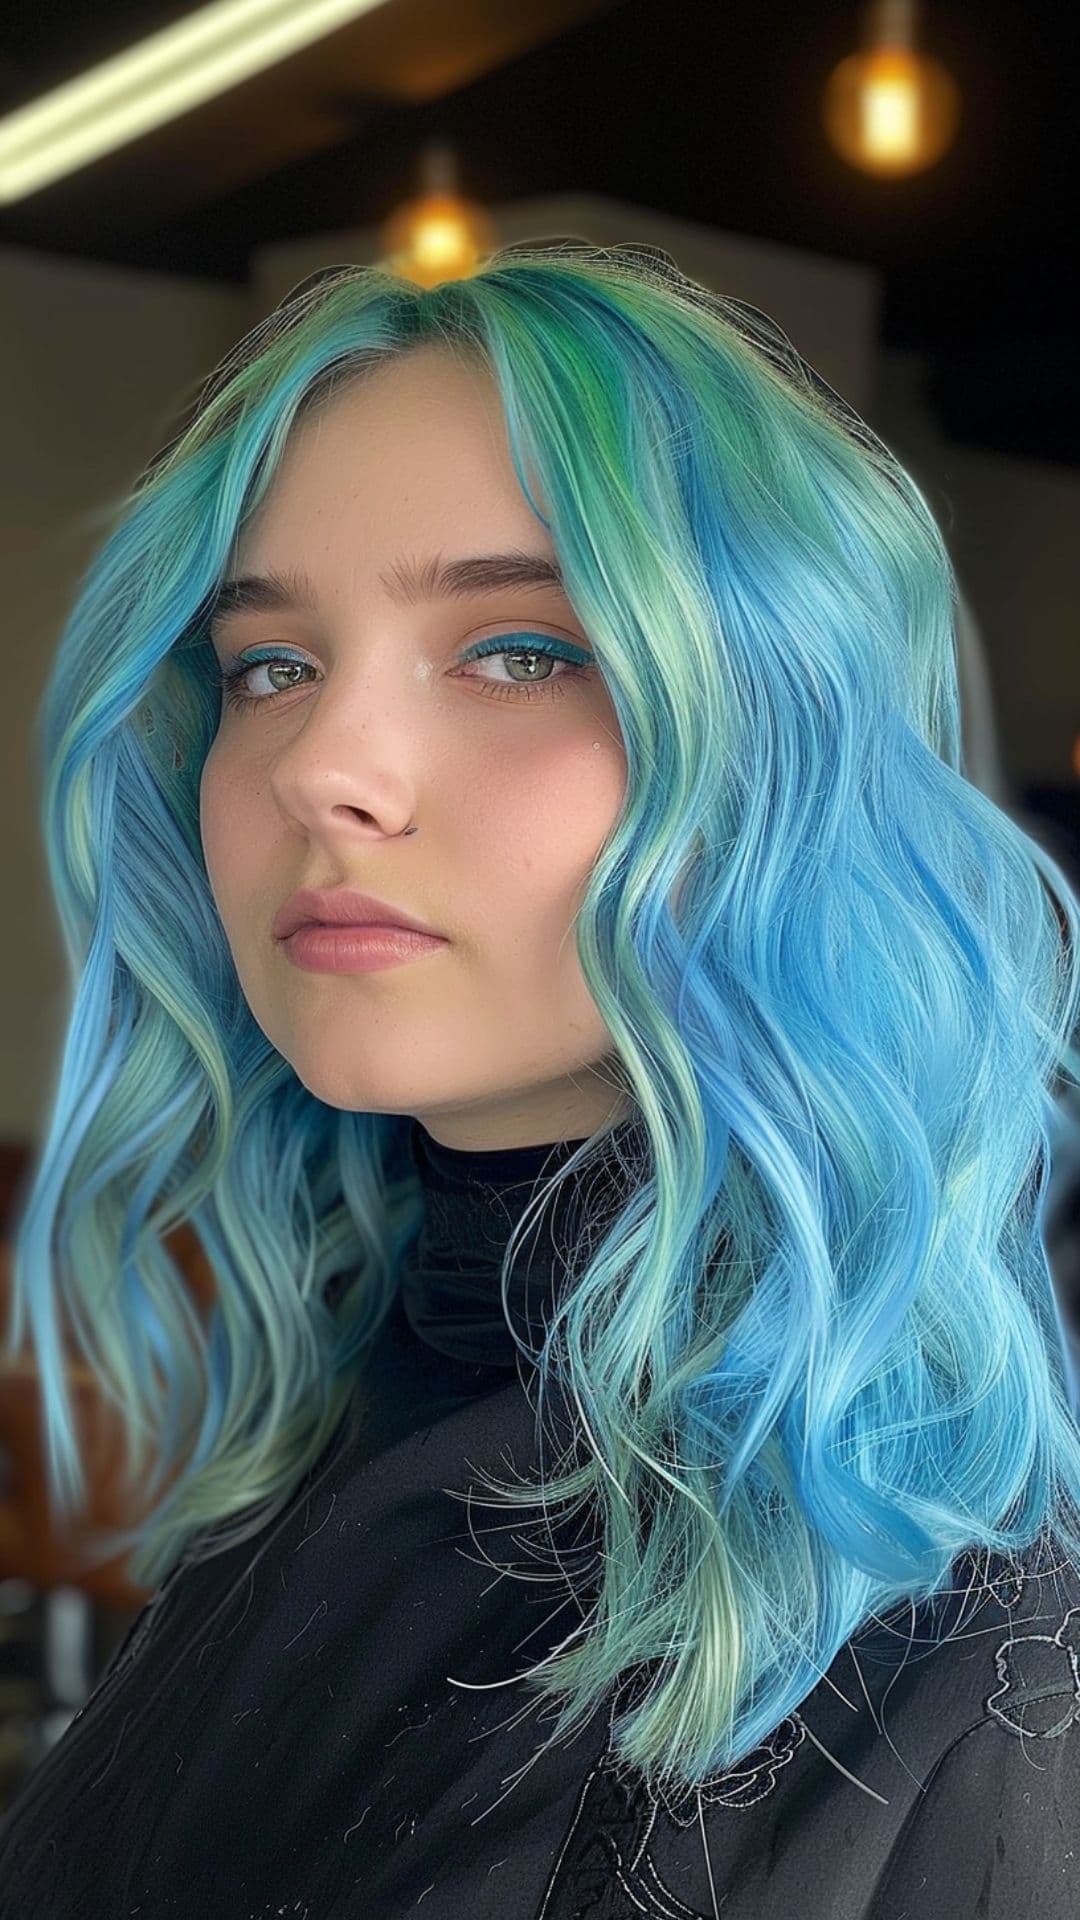 A woman modelling a pastel blue and mint green hair.